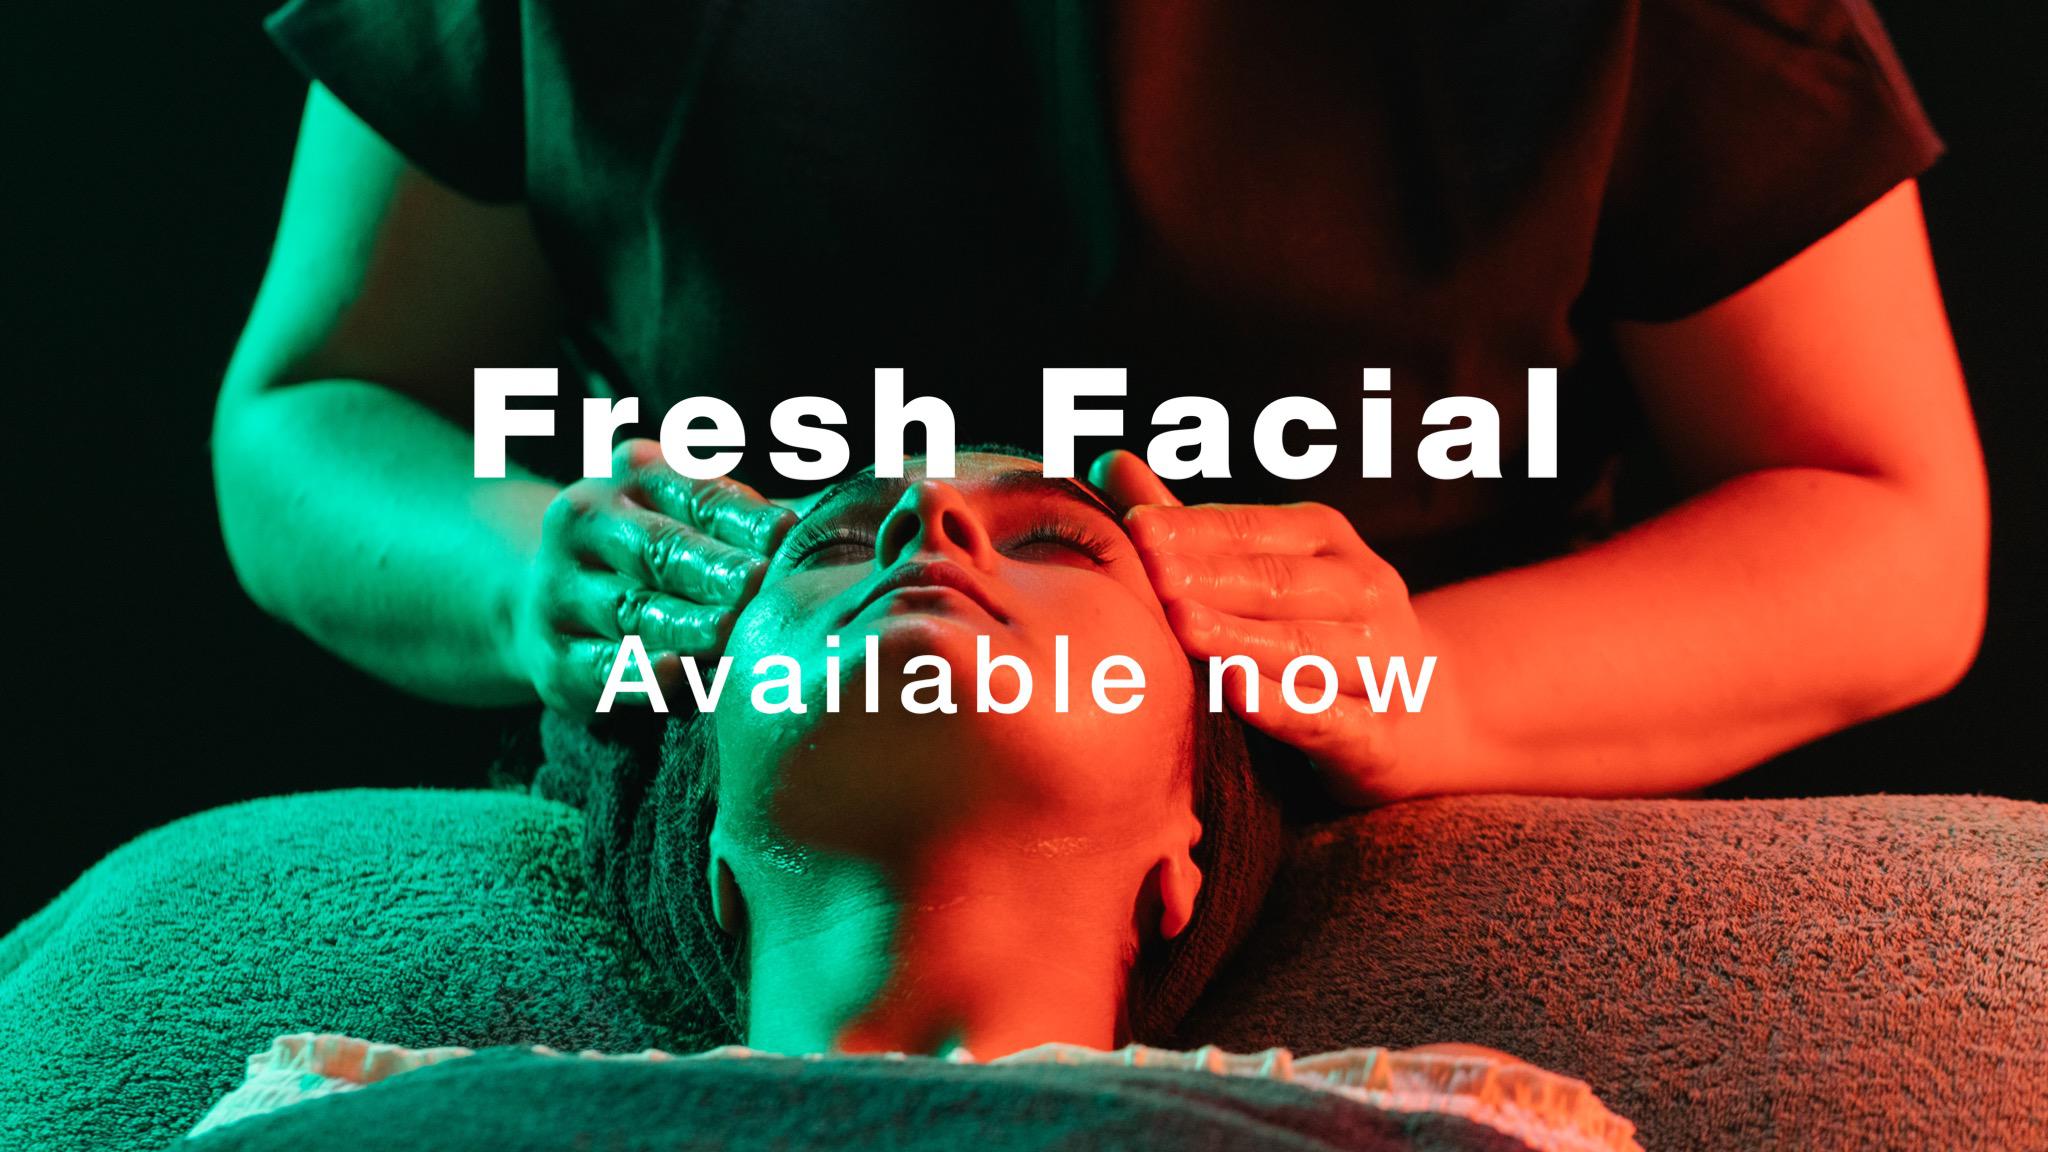 Roll up, roll up for our Fresh Facial Treatment available now from all Lush Spa stores across the UK Lush Spa Edinburgh Edinburgh 01312 254688